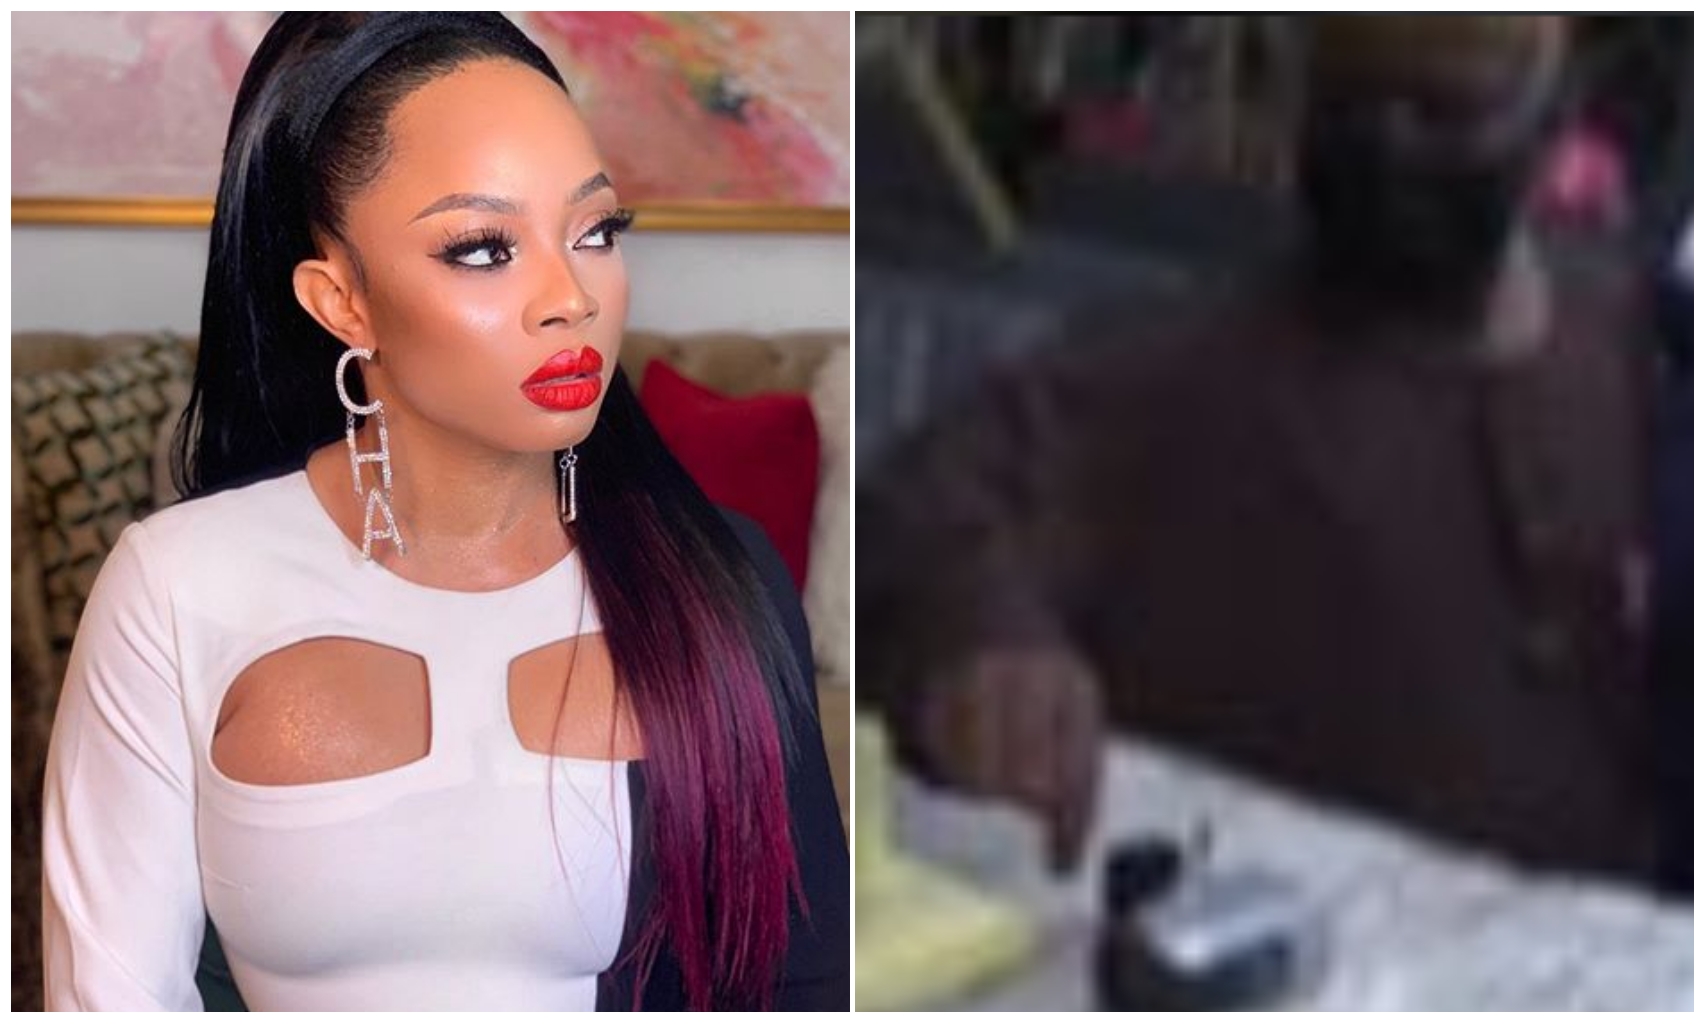 Waiting for the investigation team – Toke Makinwa reacts to Fashola's camcorder discovery